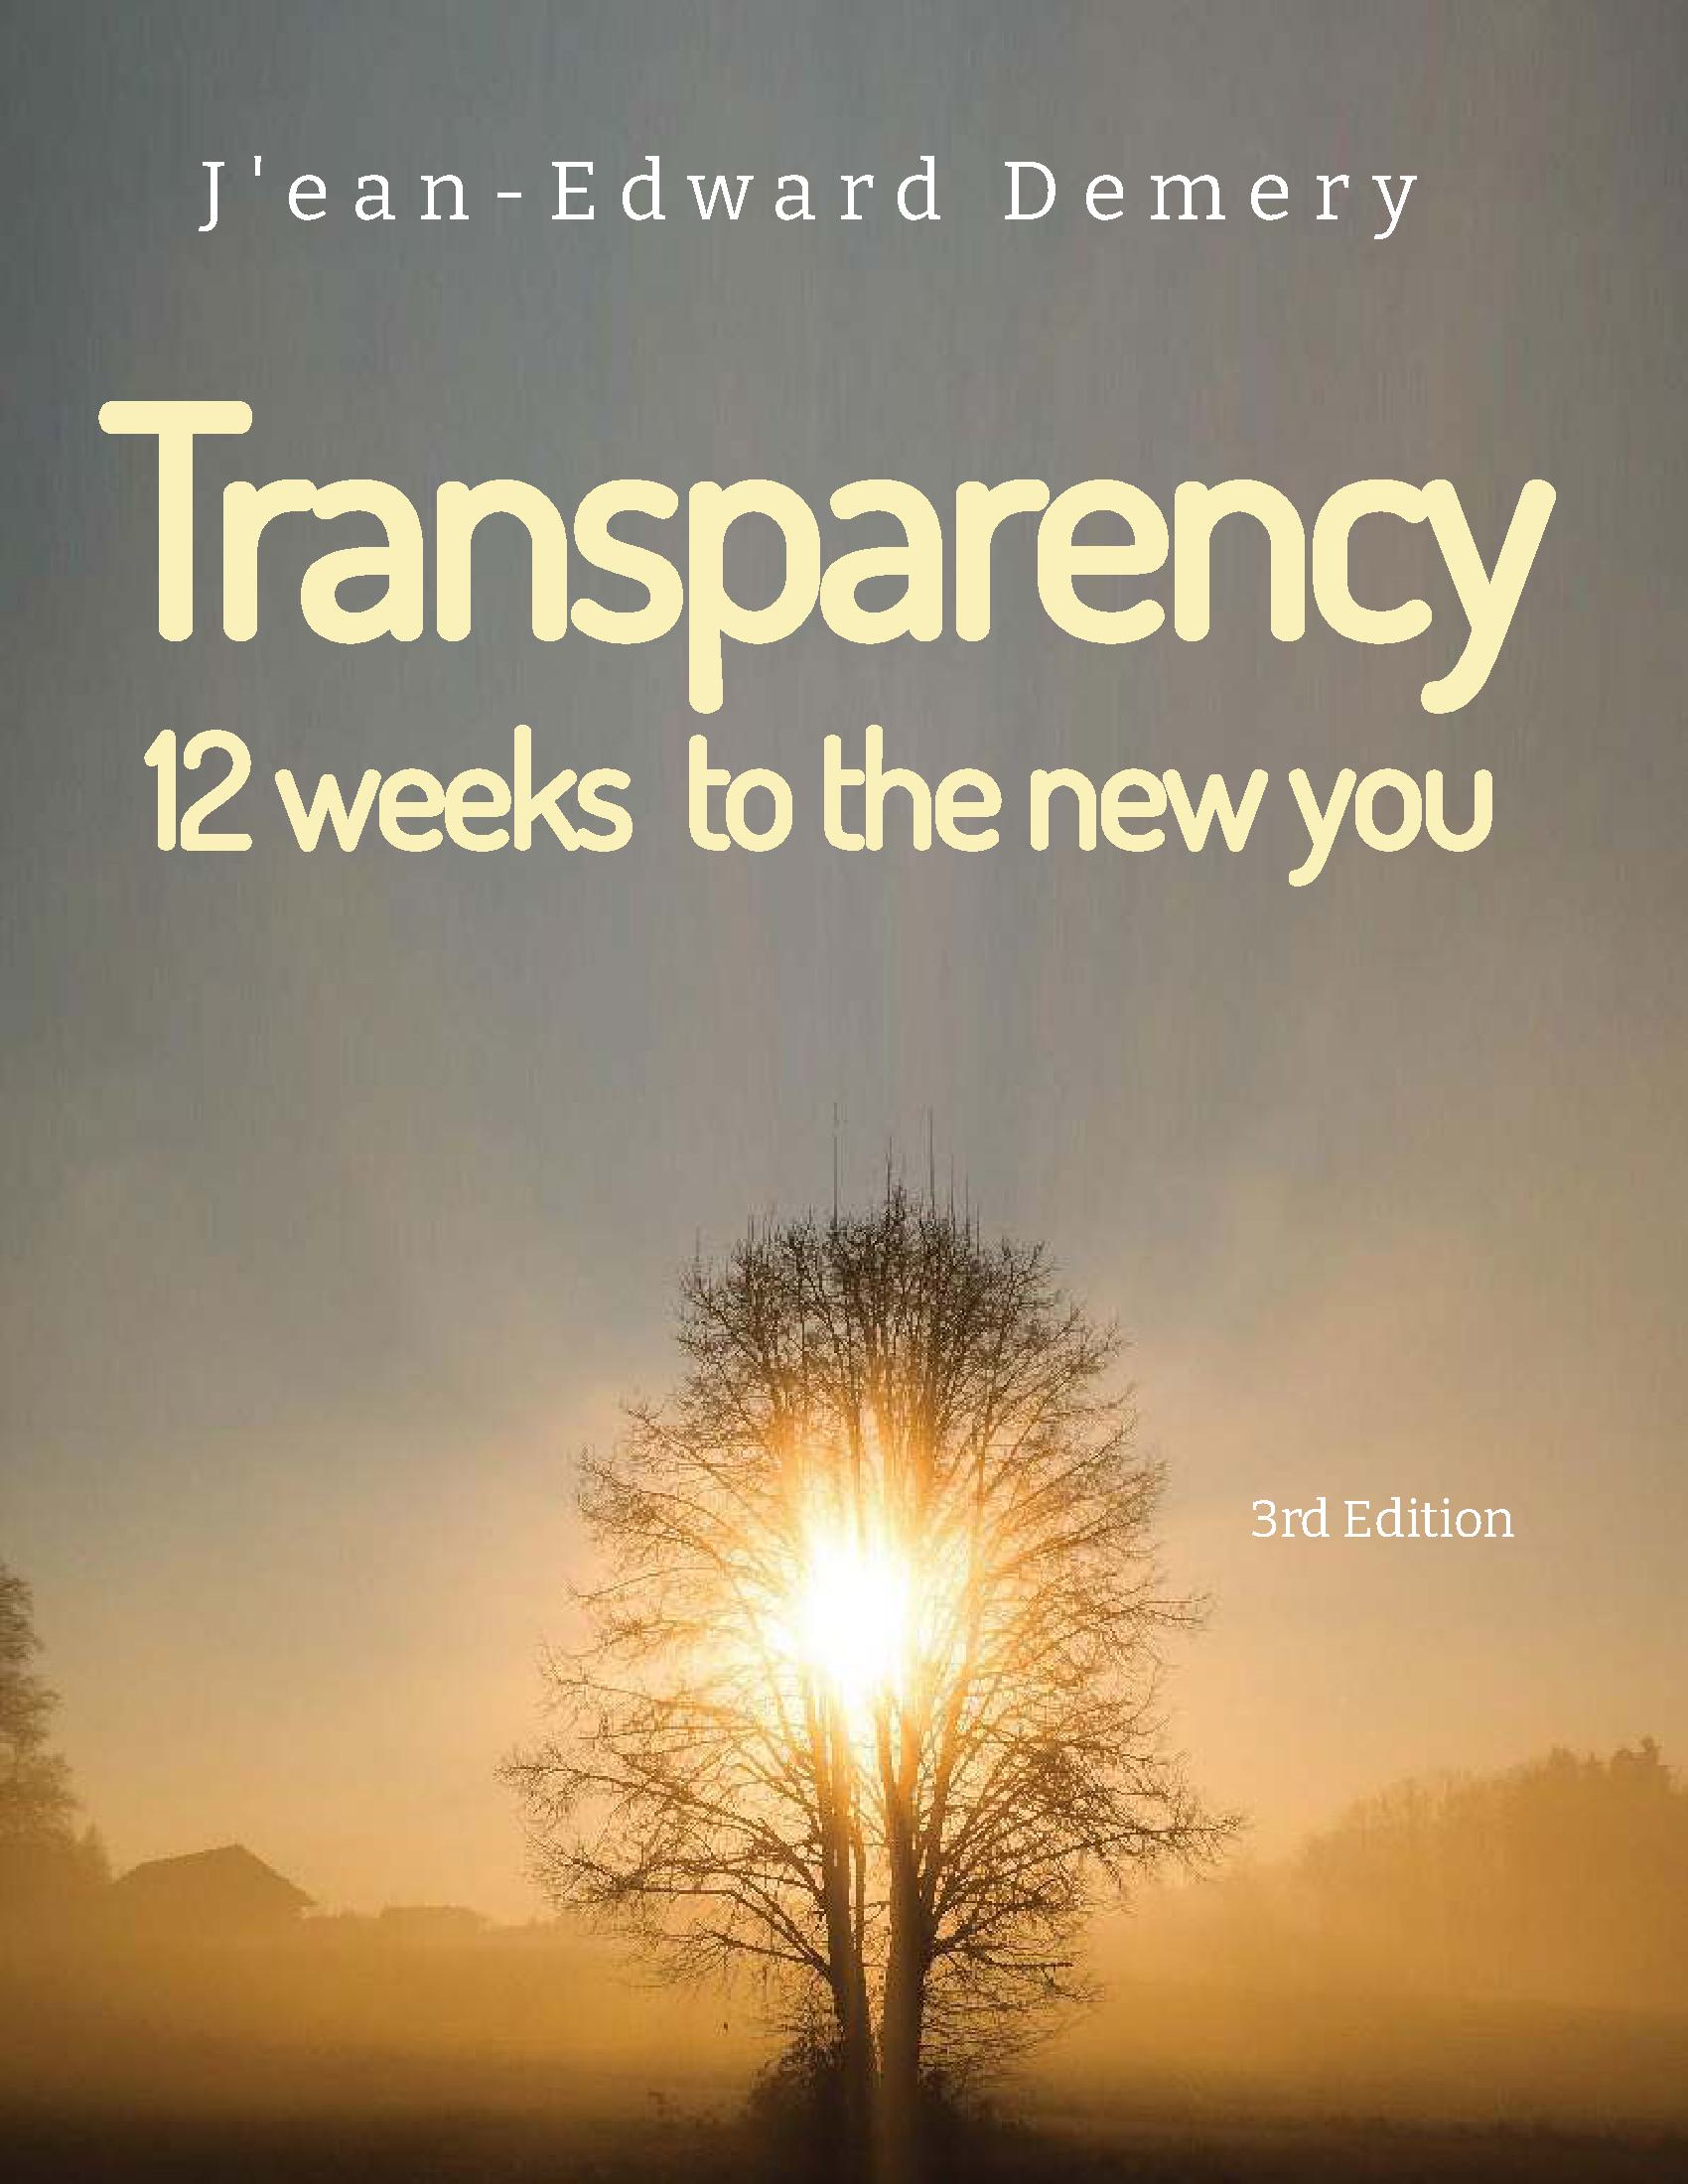 3rd edition of his book Transparency.